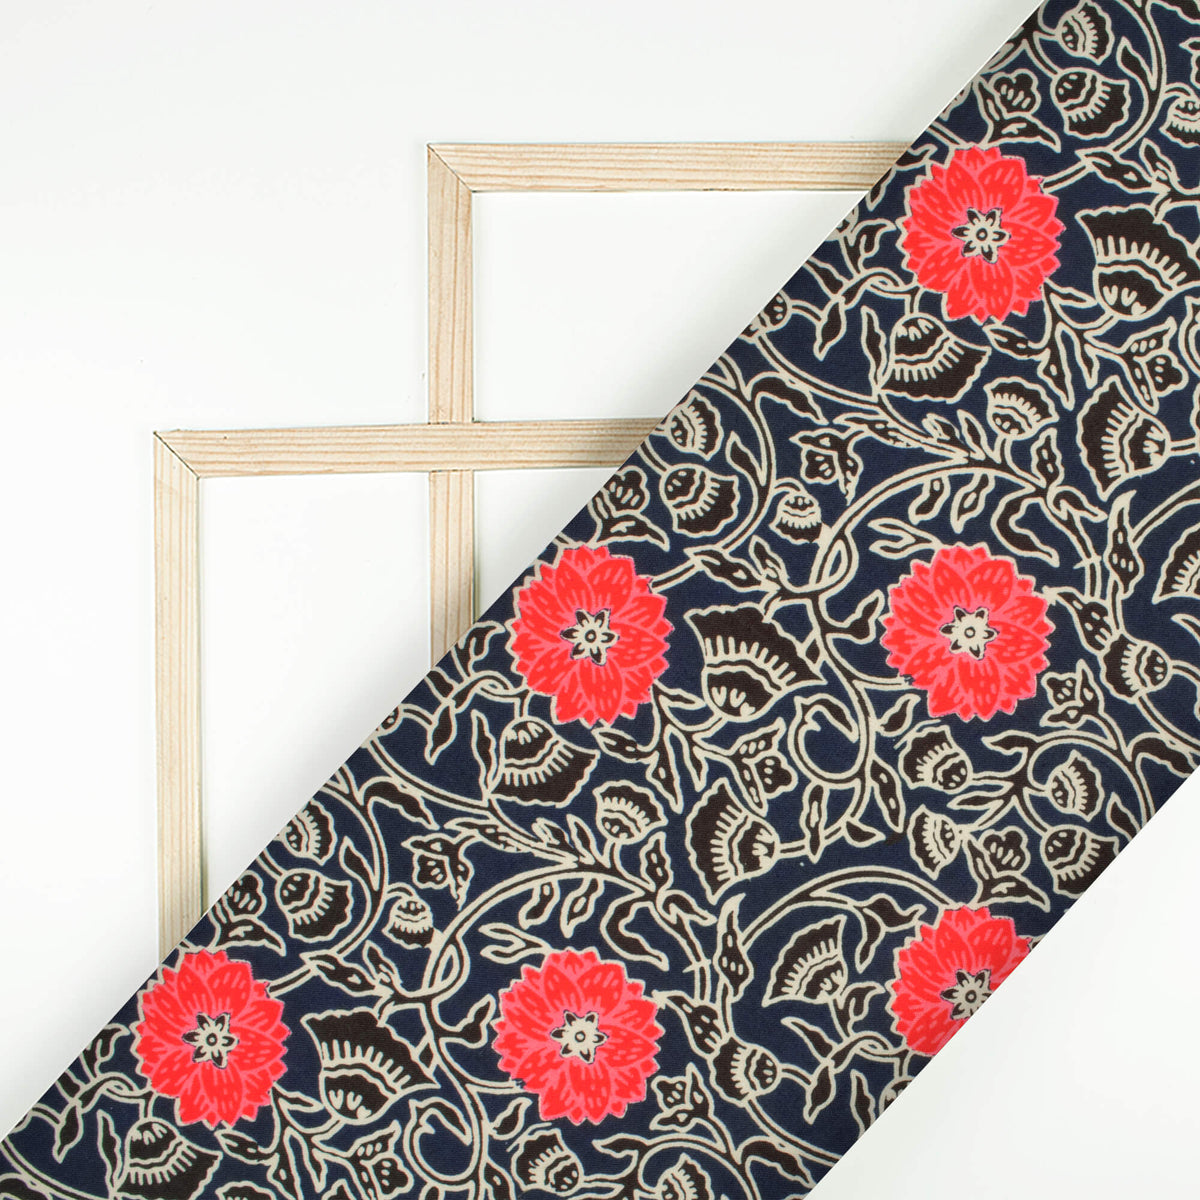 Navy Blue And Desire Red Floral Pattern Digital Print Rayon Fabric